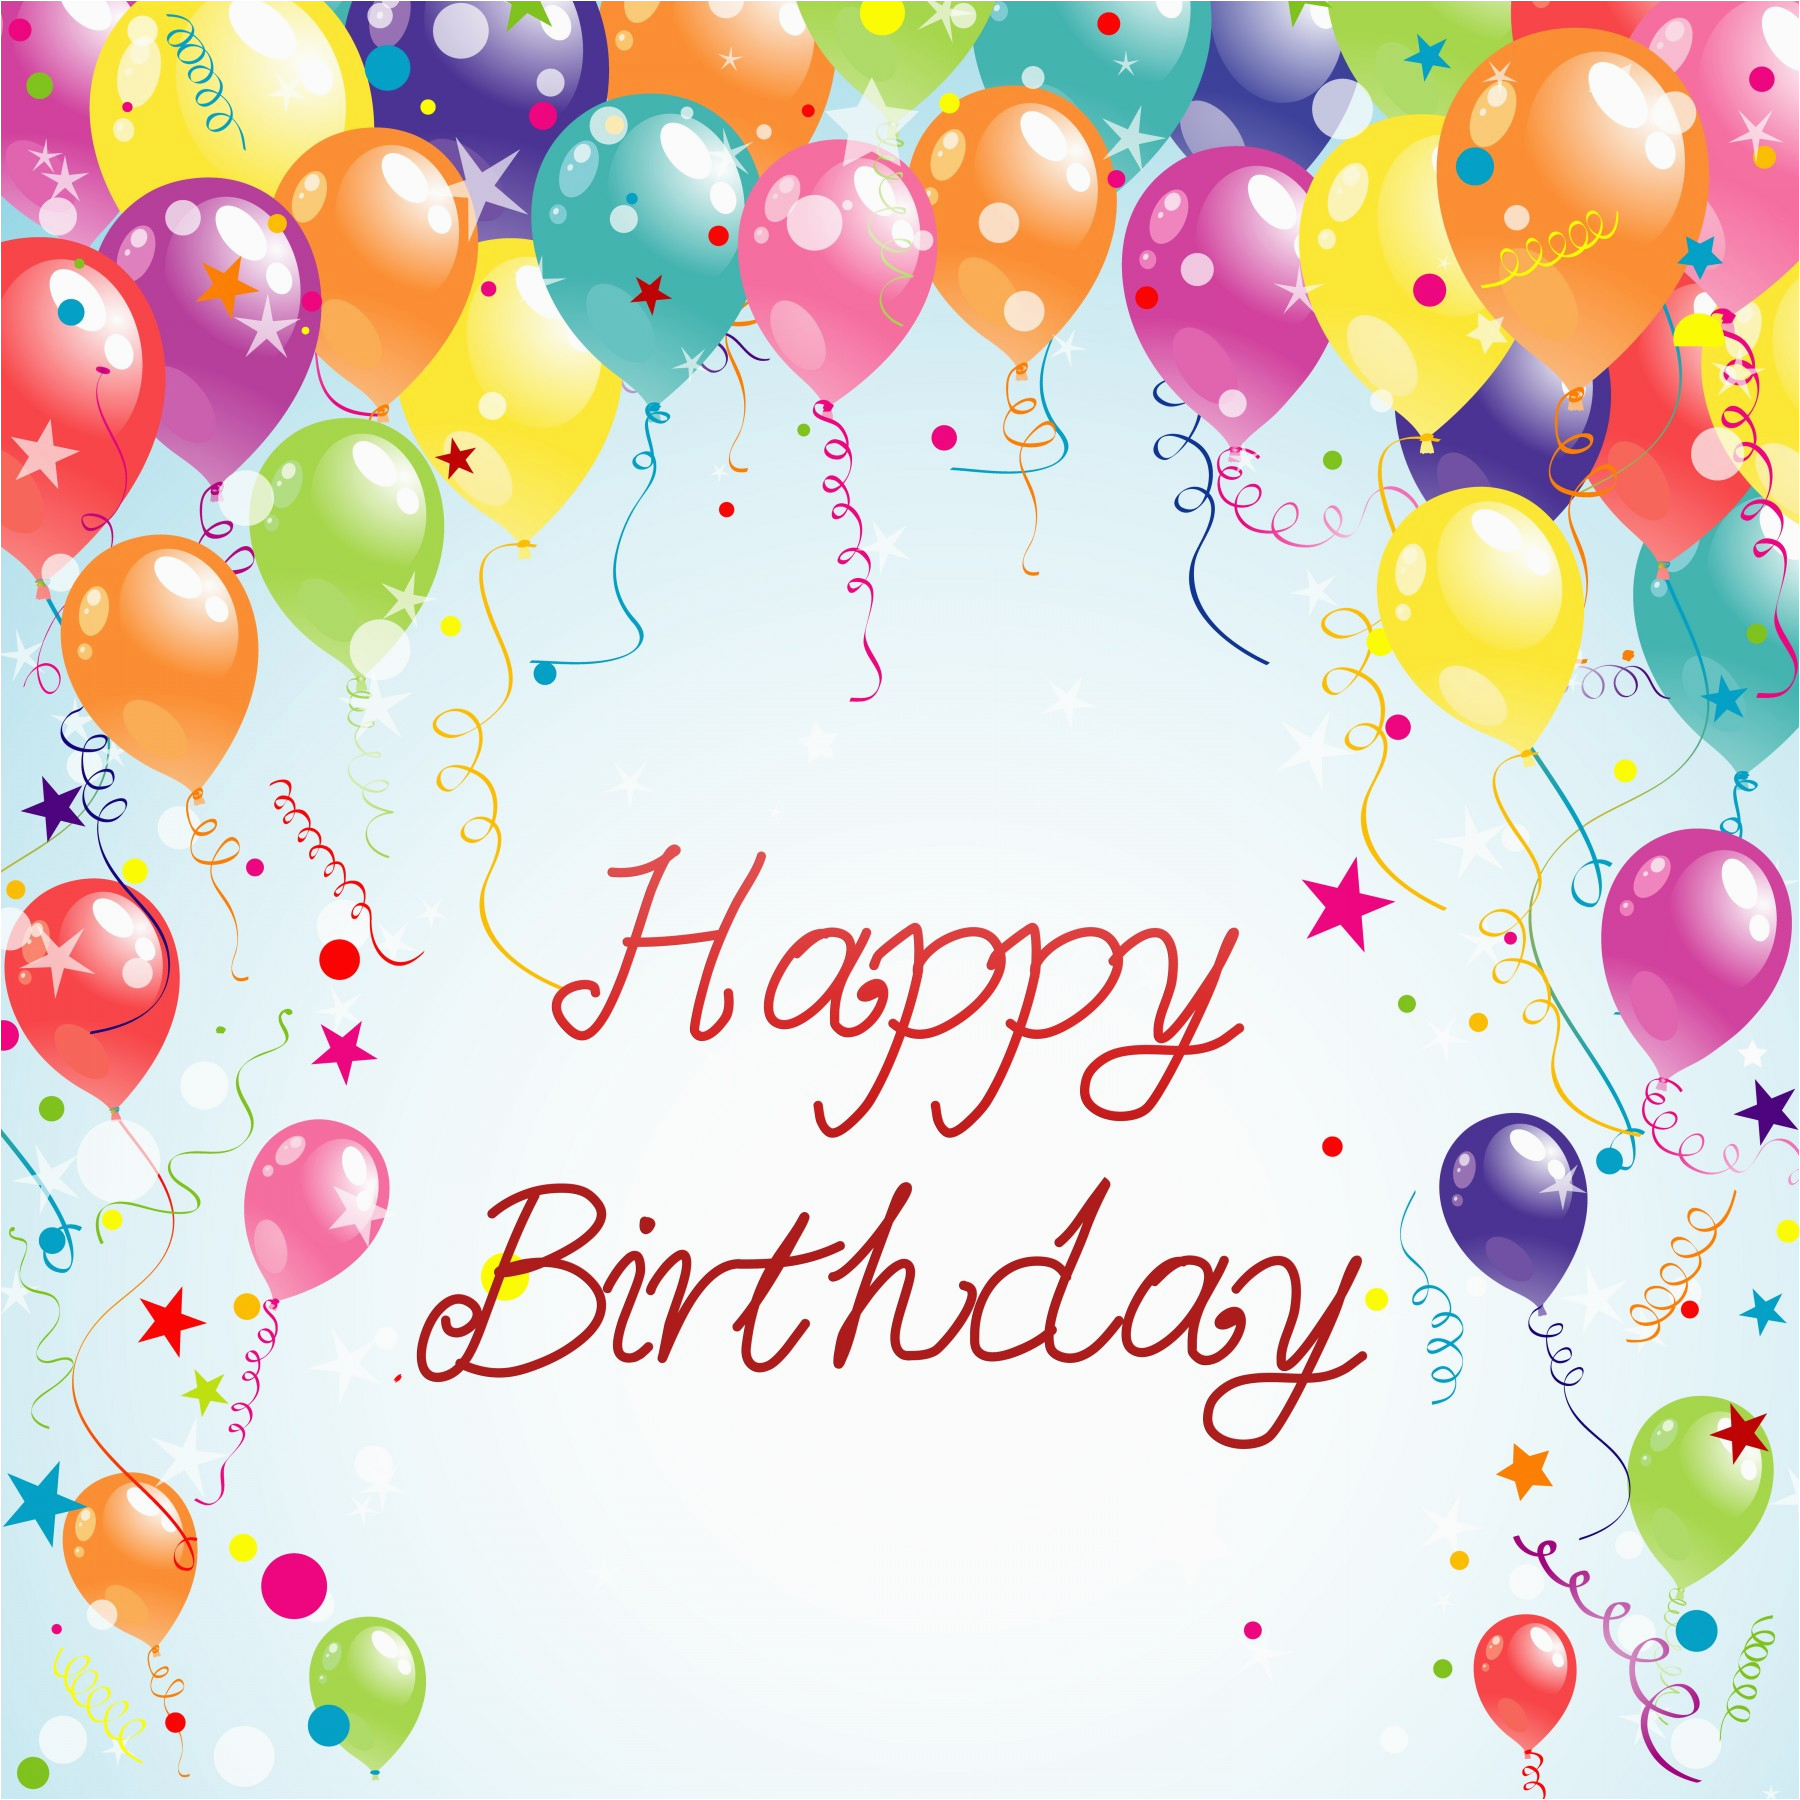 Free E Birthday Cards for Adults Birthday Cards Images and Best Wishes for You Birthday